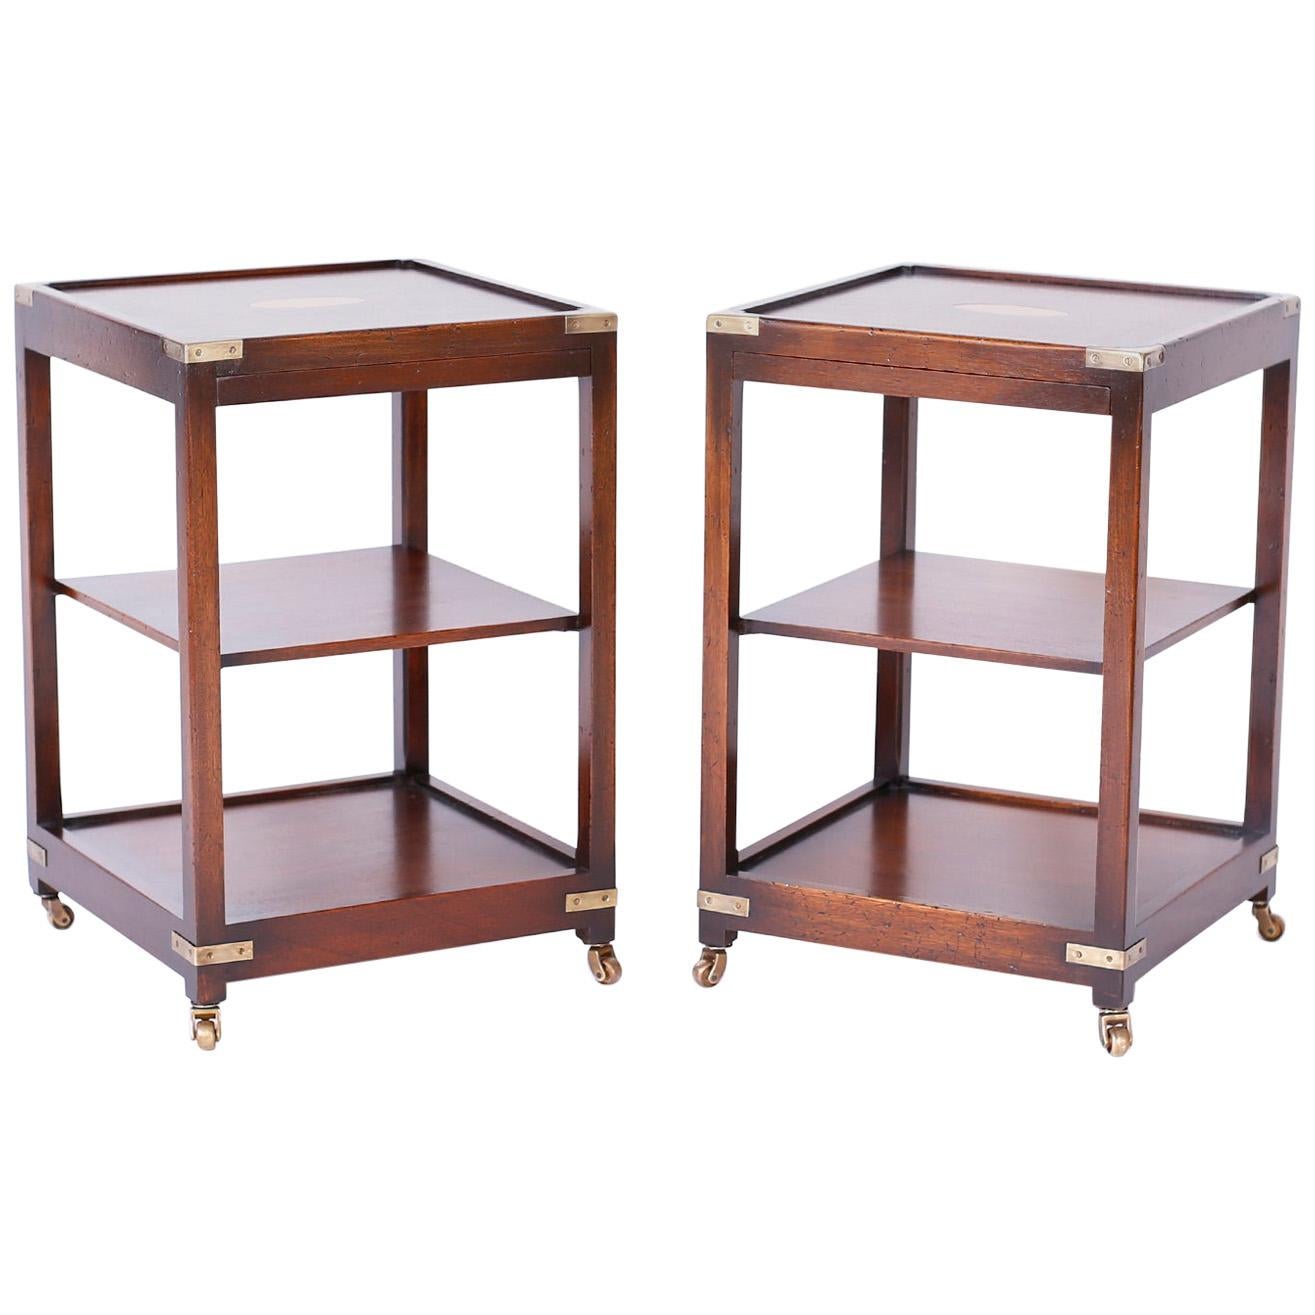 Pair of Midcentury Three Tiered Campaign Style Tables or Stands with Pullouts